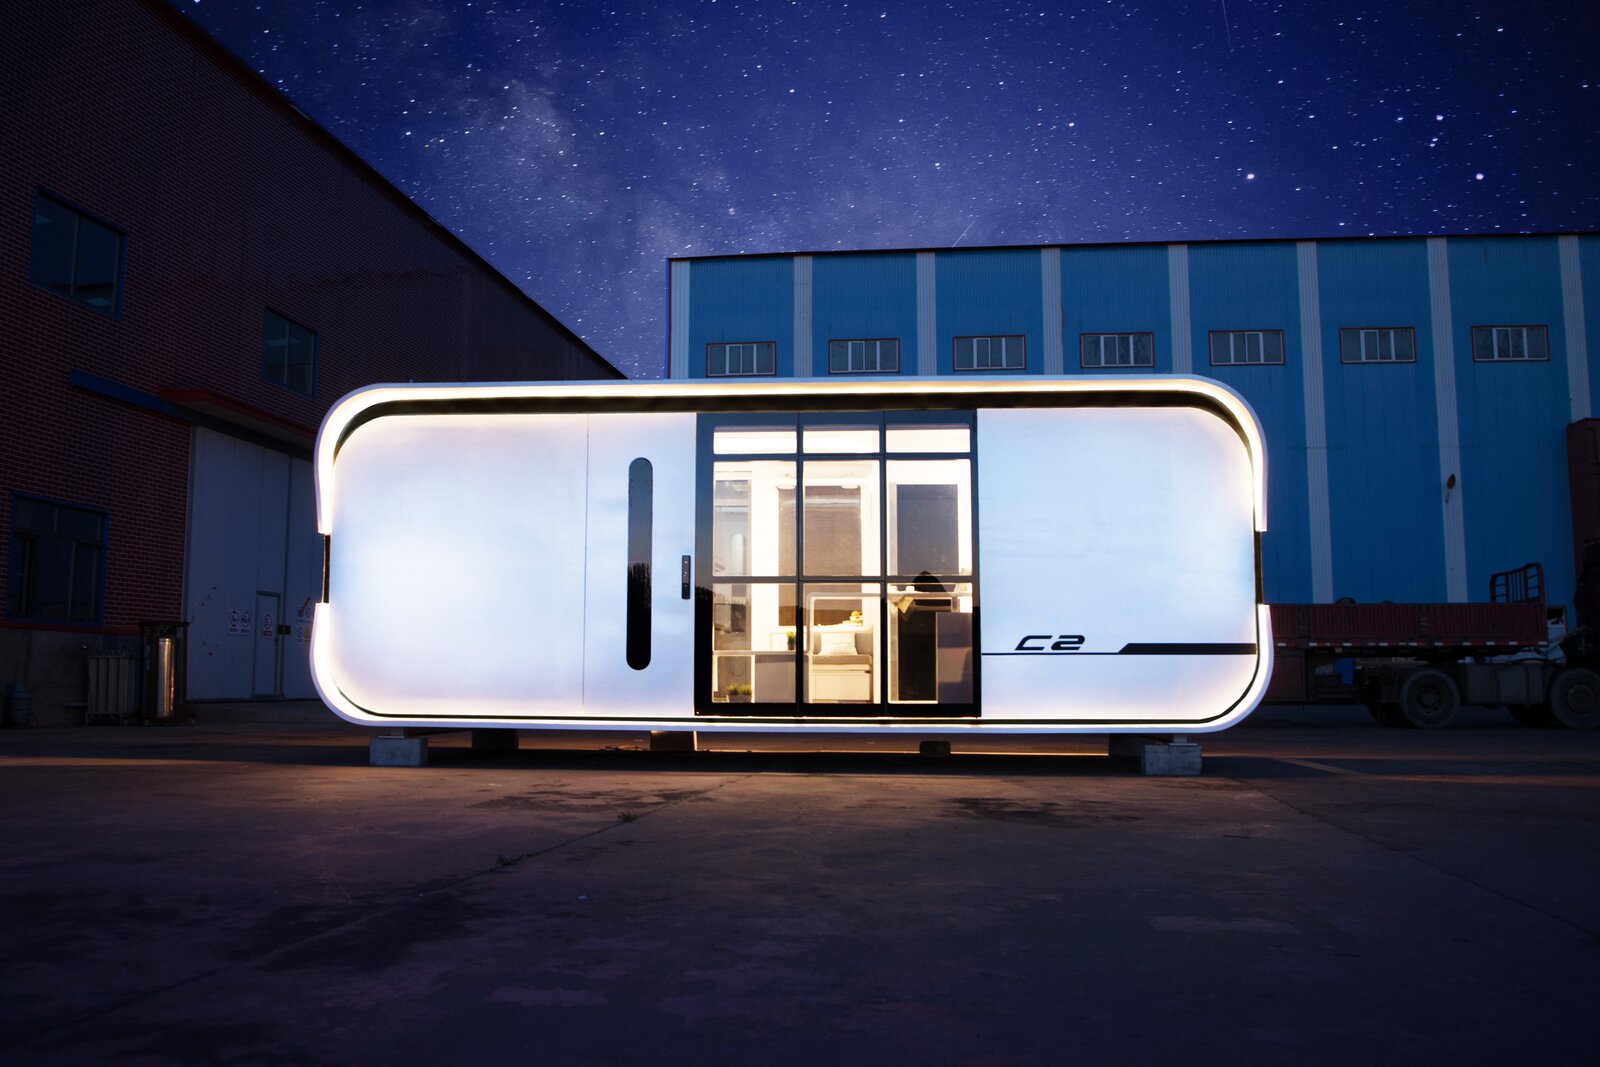 The Cube Two Is the Tiny Home of Tomorrow